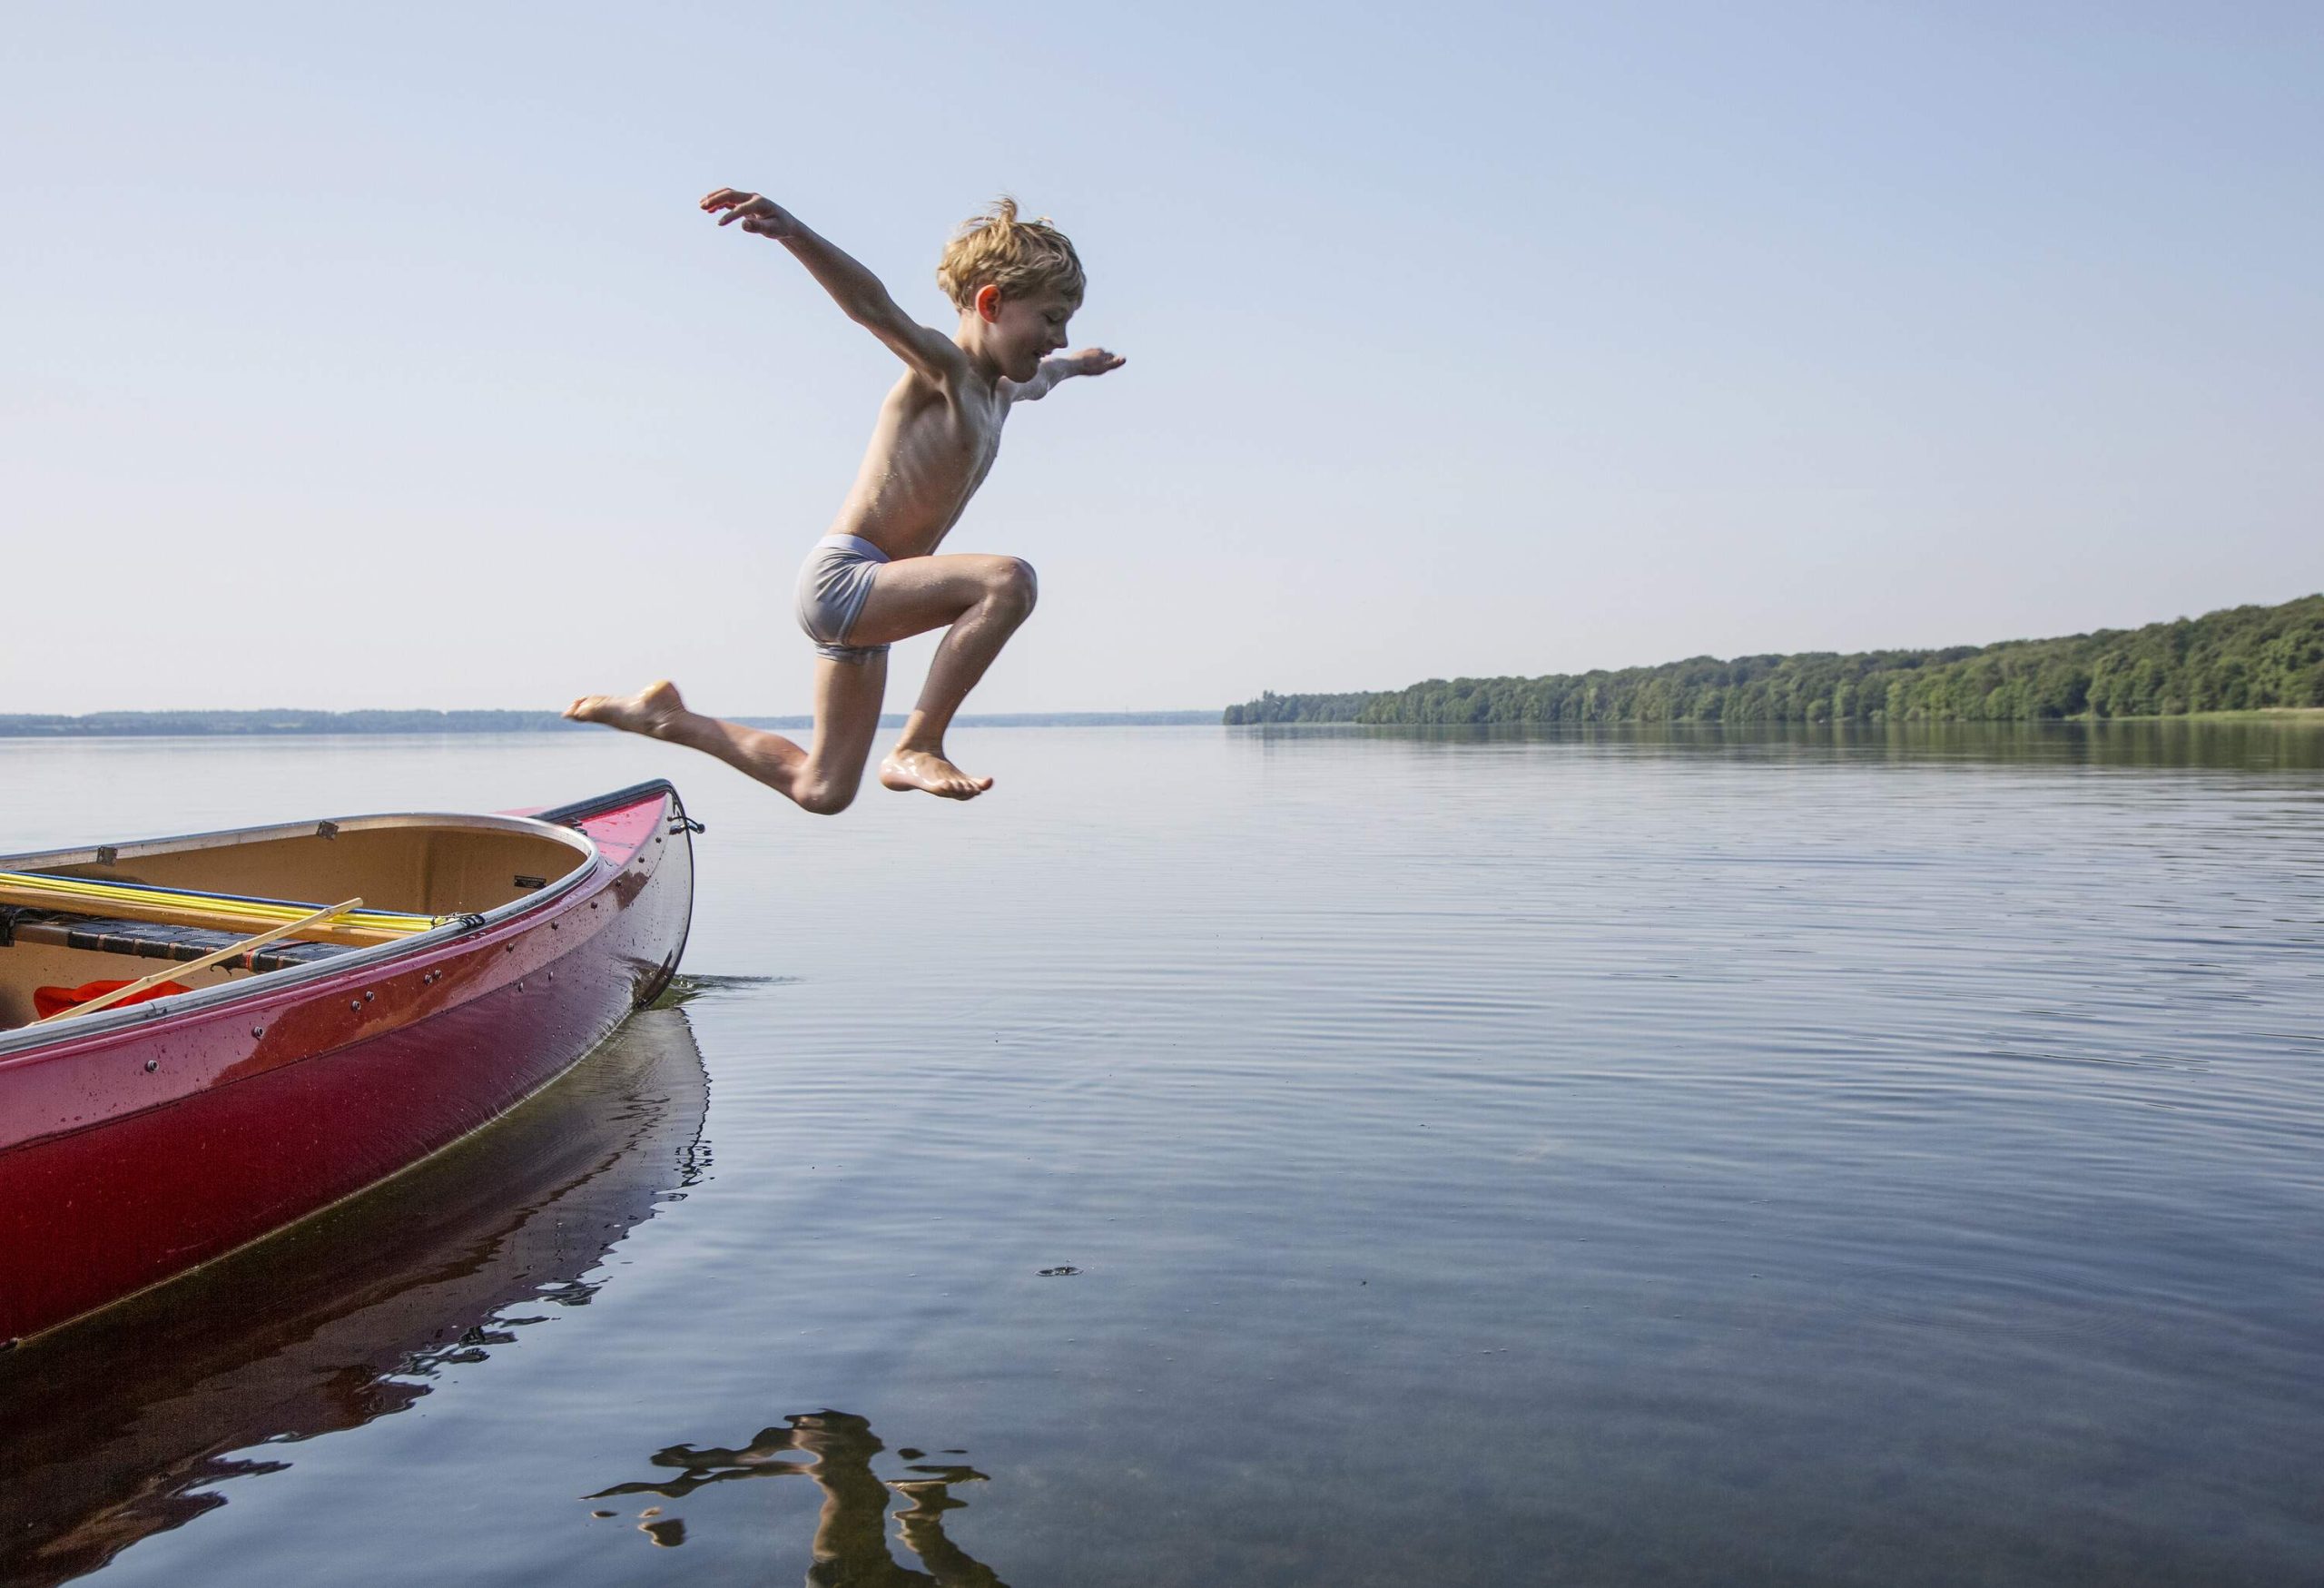 A little boy jumping into a lake from a canoe.